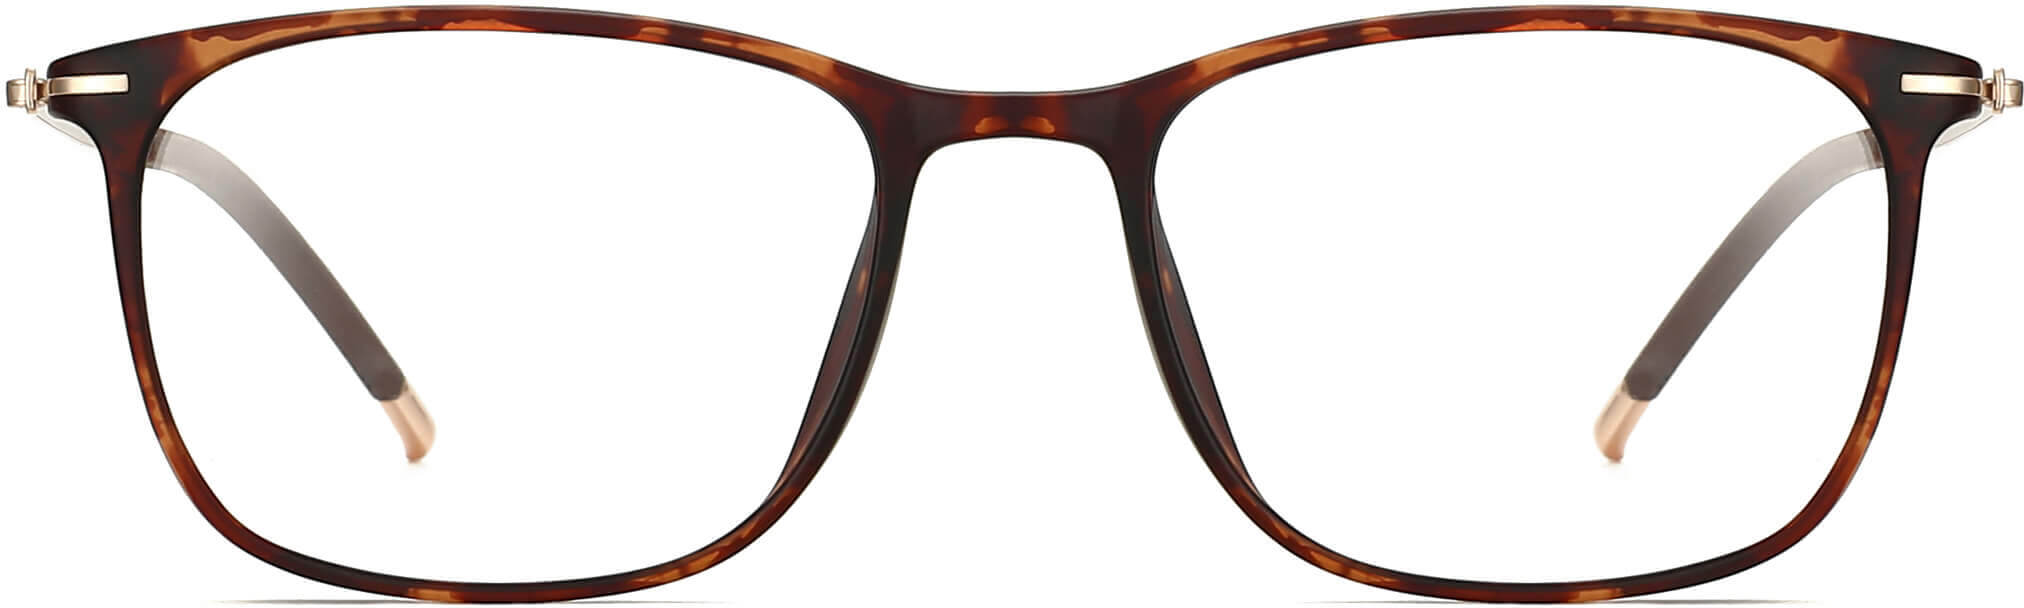 ventro metal tortoise Eyeglasses from ANRRI, front view